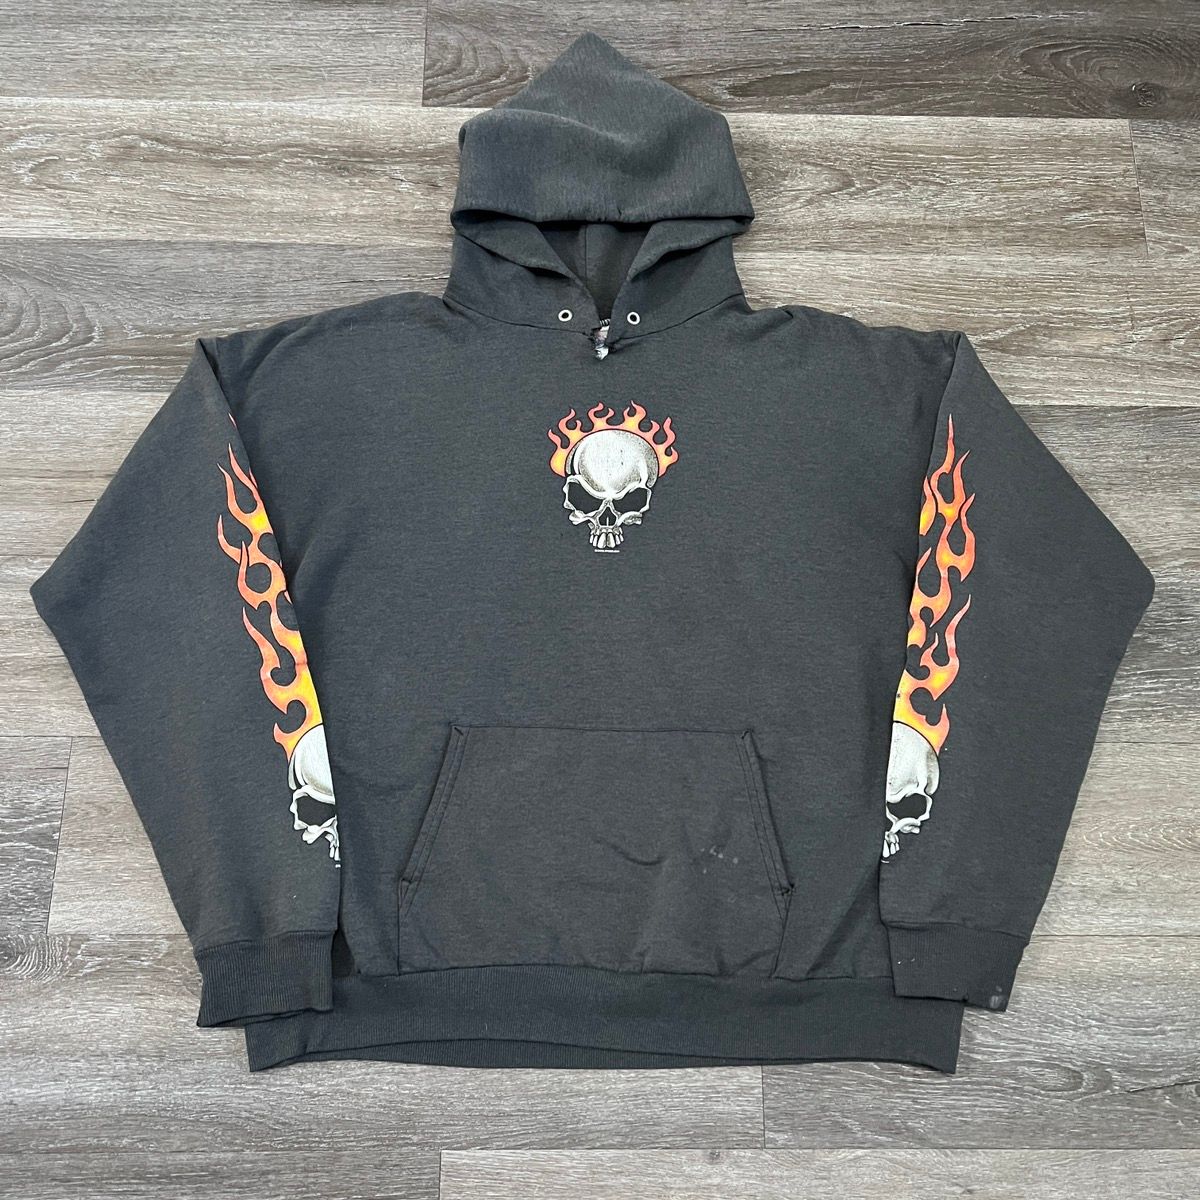 Pre-owned Jnco X Straight Faded Vintage Y2k Tribal Flame Skull Faded Black Jnco Style Hoodie